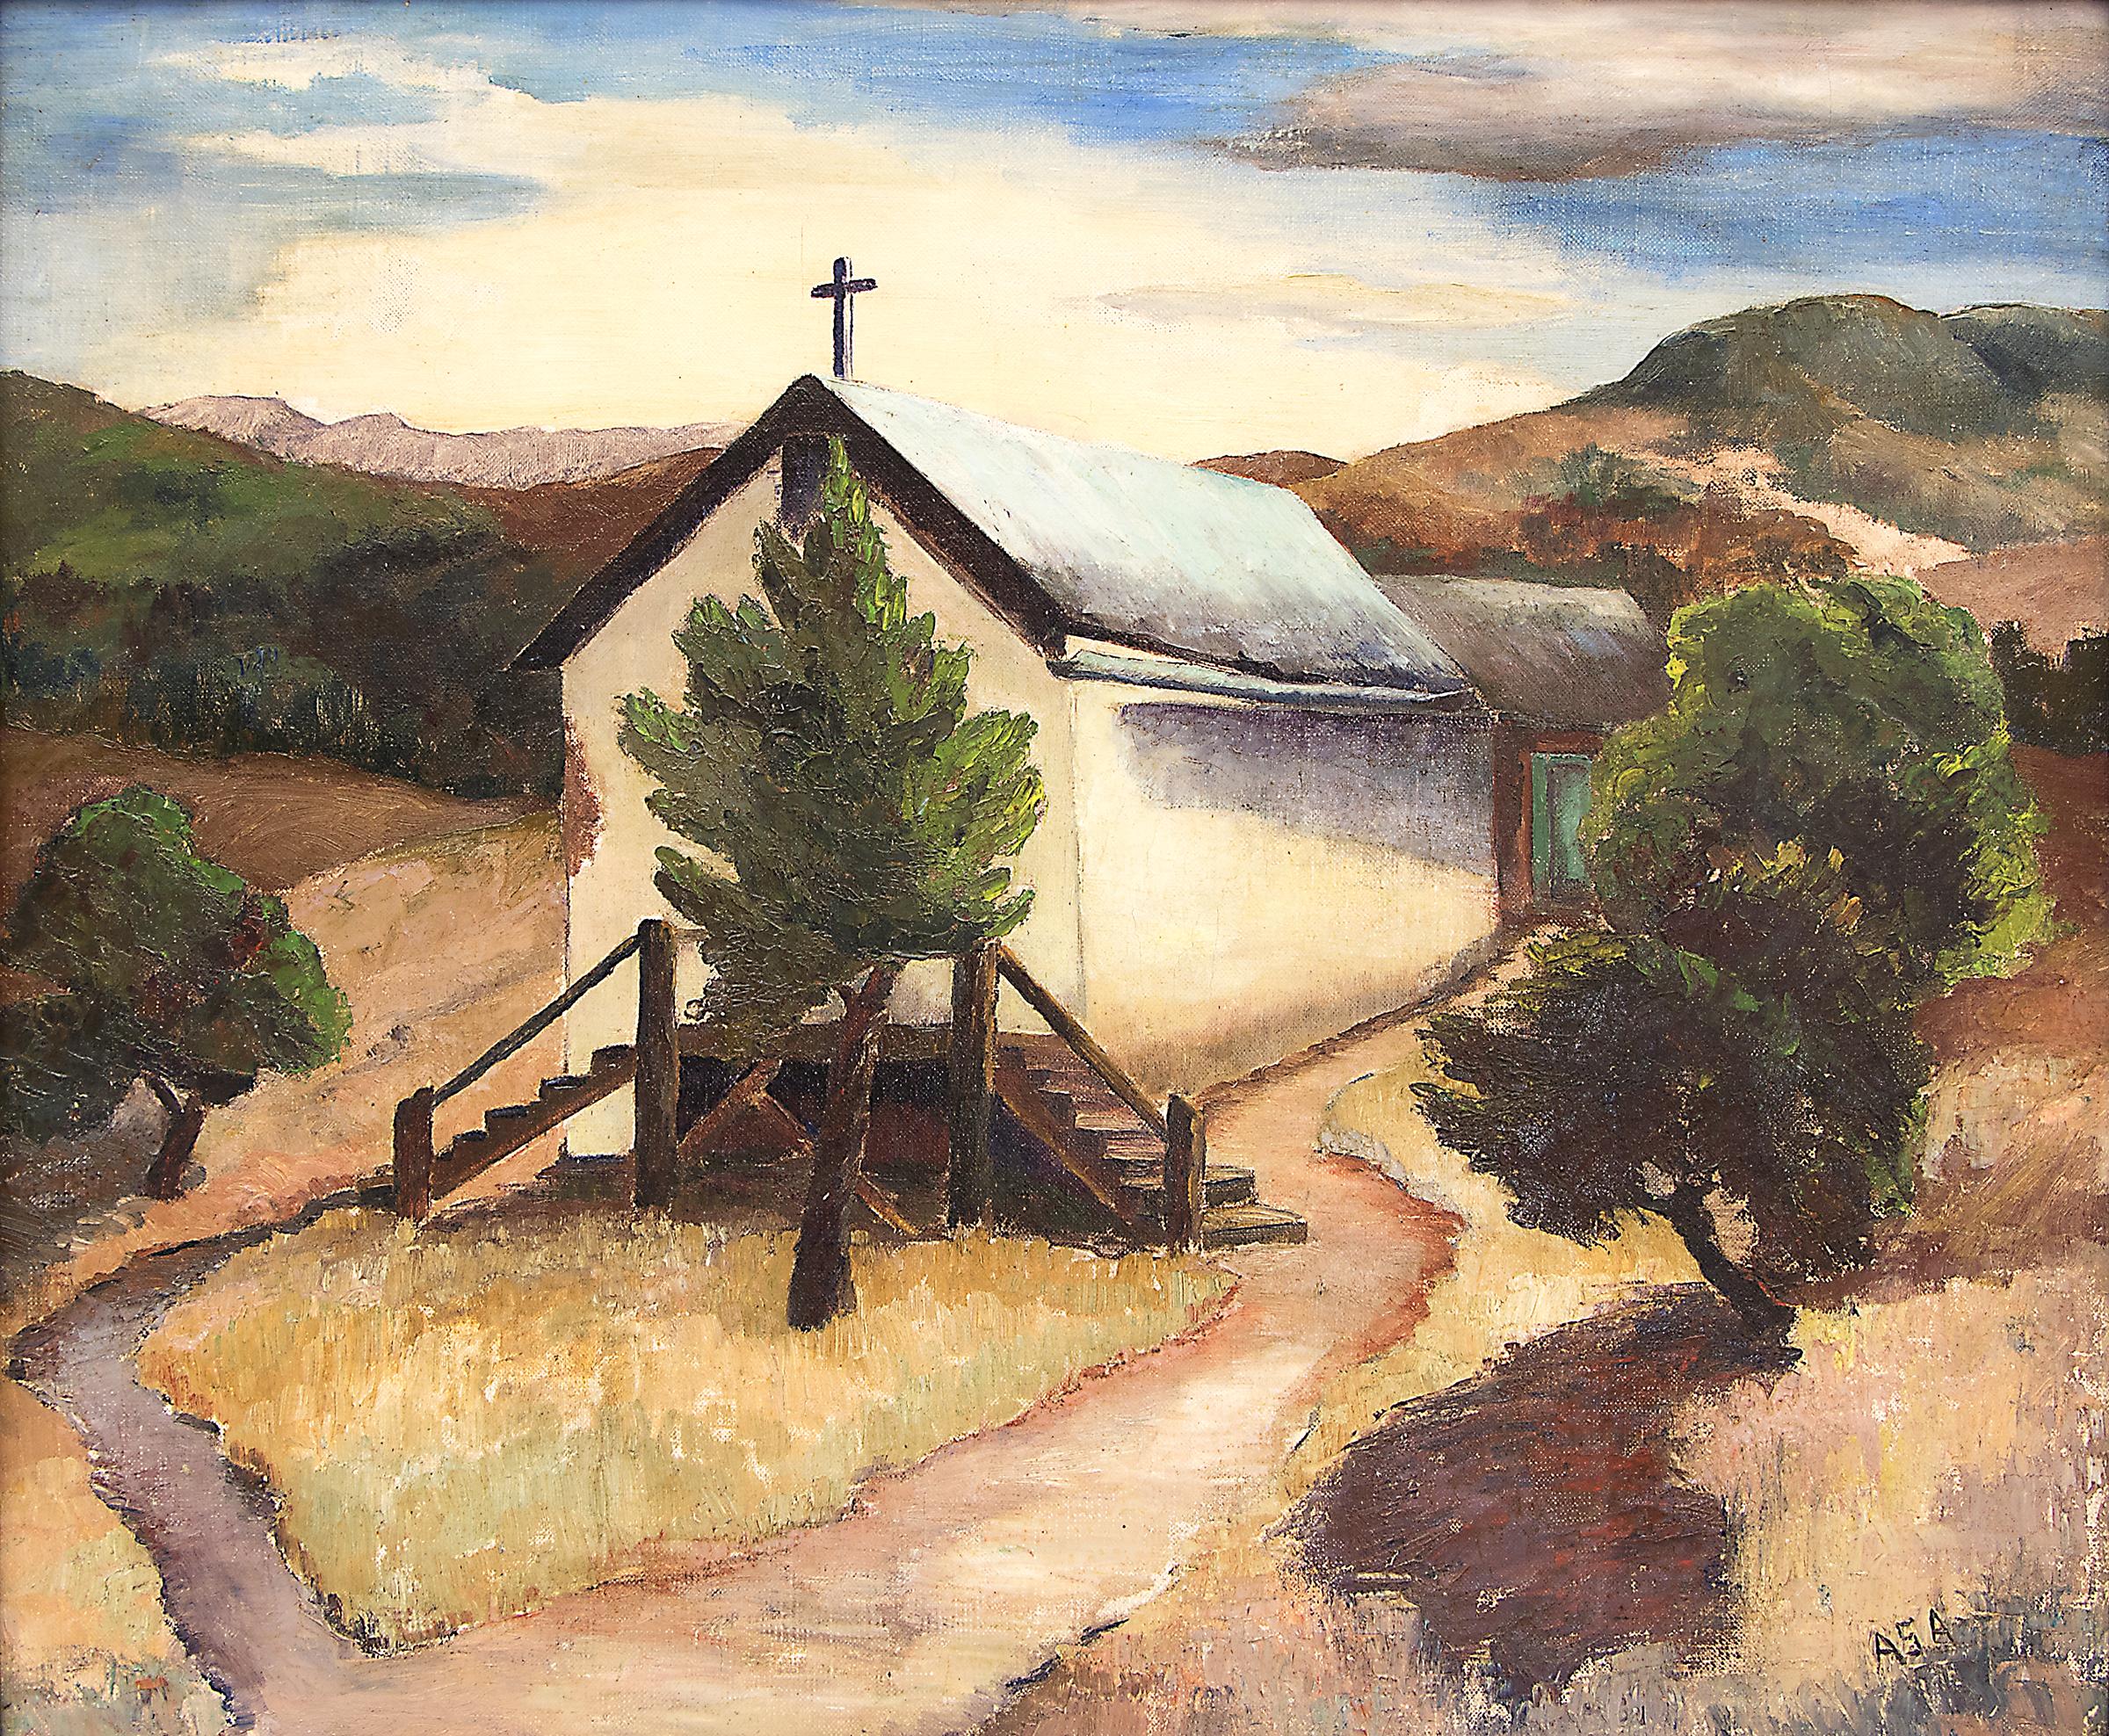 High Rolls, New Mexico, 1940s Southwestern Landscape, Desert Church with Trees - Painting by Andersen, Andreas Storrs